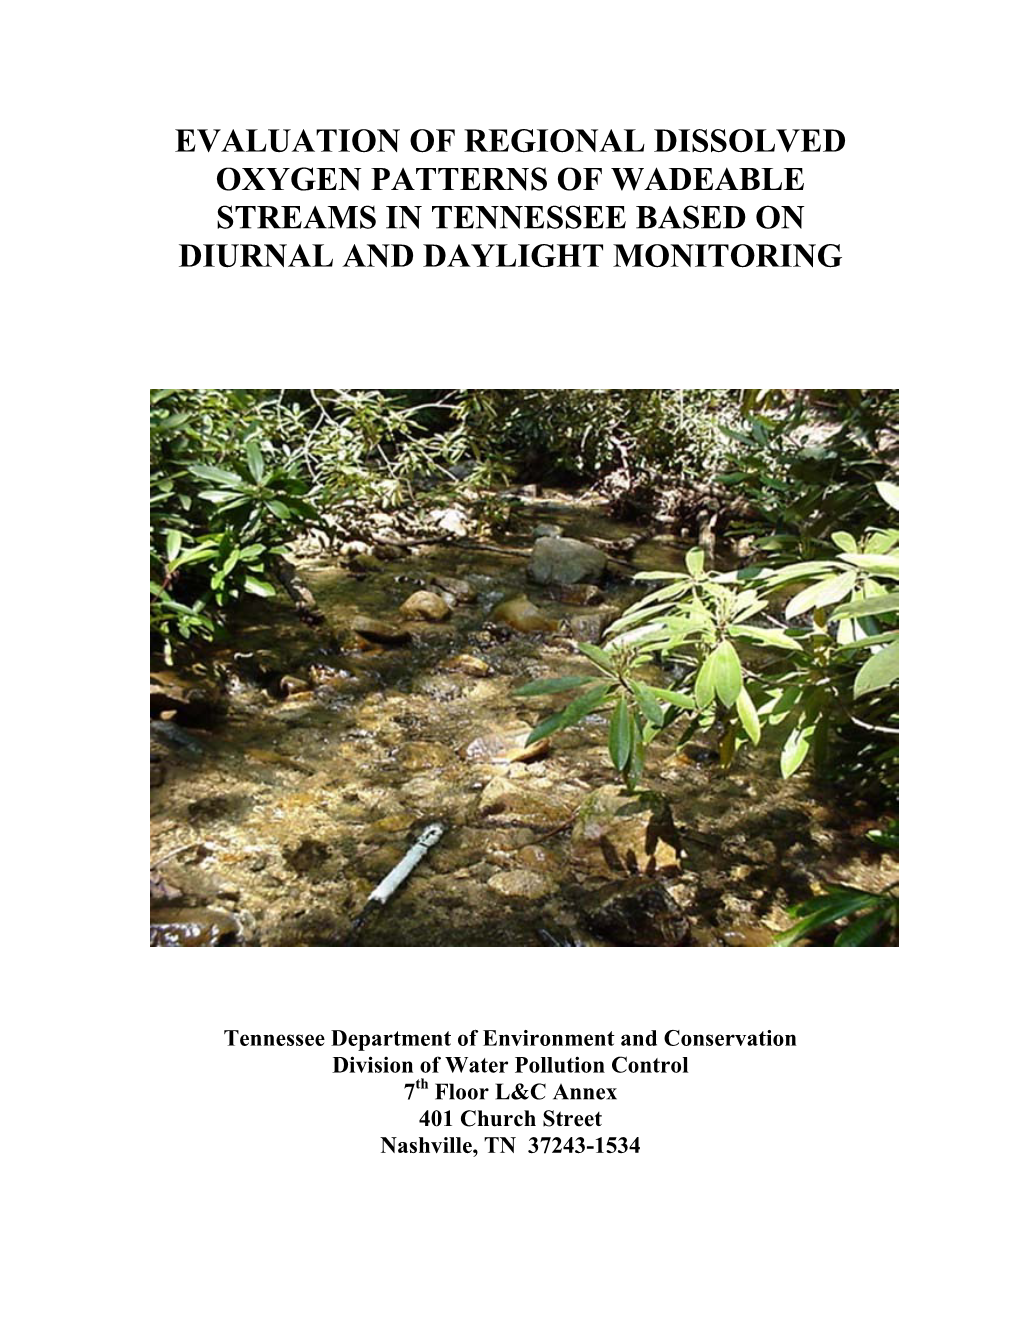 Evaluation of Regional Dissolved Oxygen Patterns of Wadeable Streams in Tennessee Based on Diurnal and Daylight Monitoring